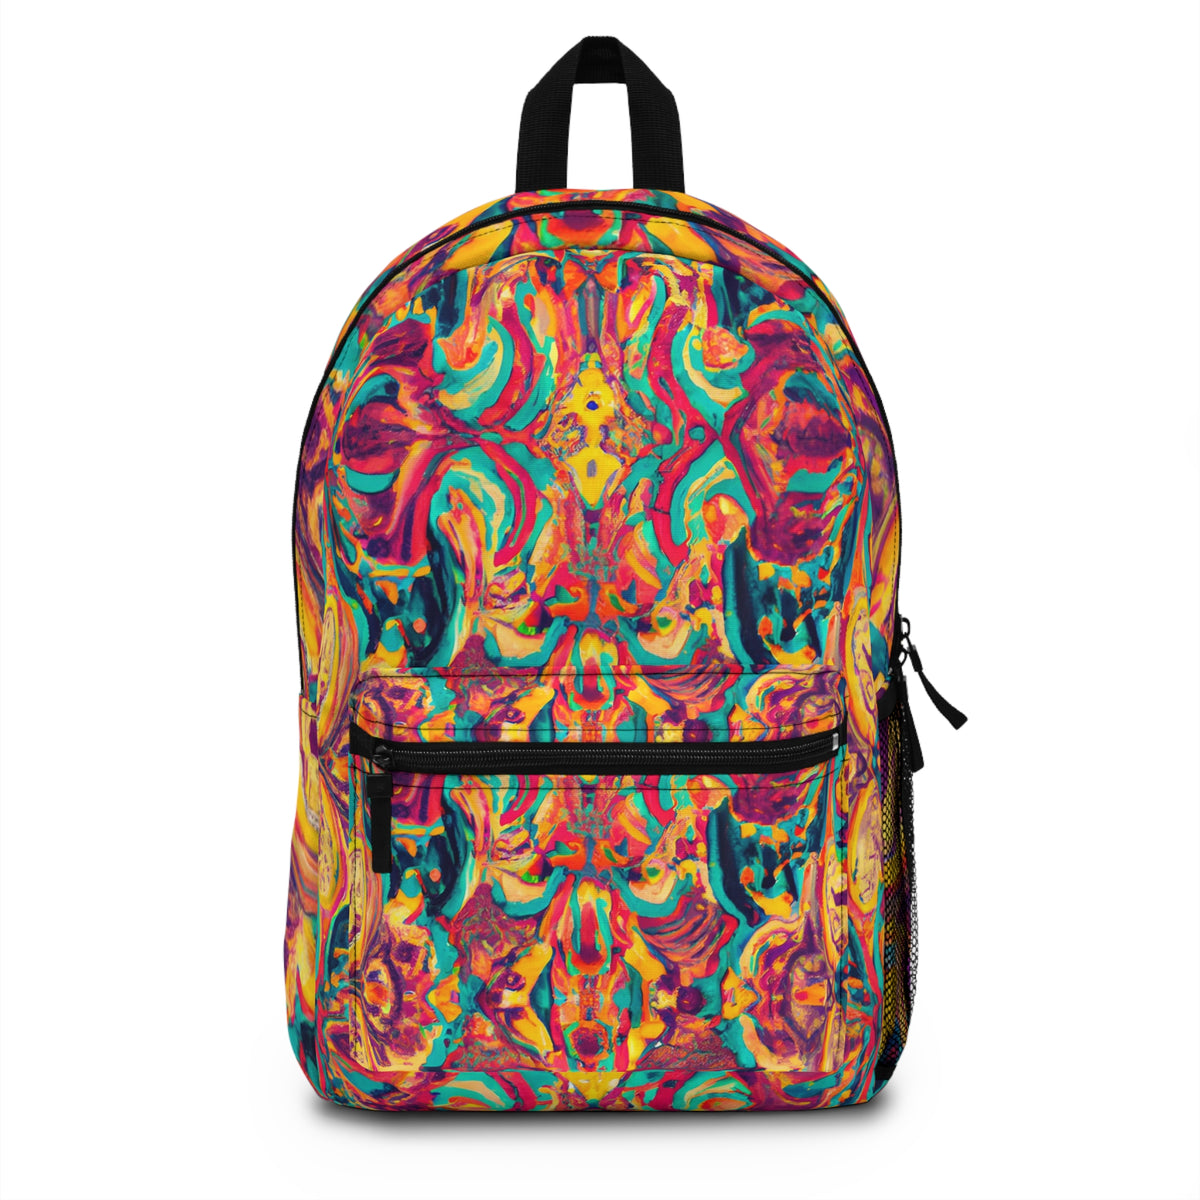 LolaVonSaucy - Gay-Inspired Backpack